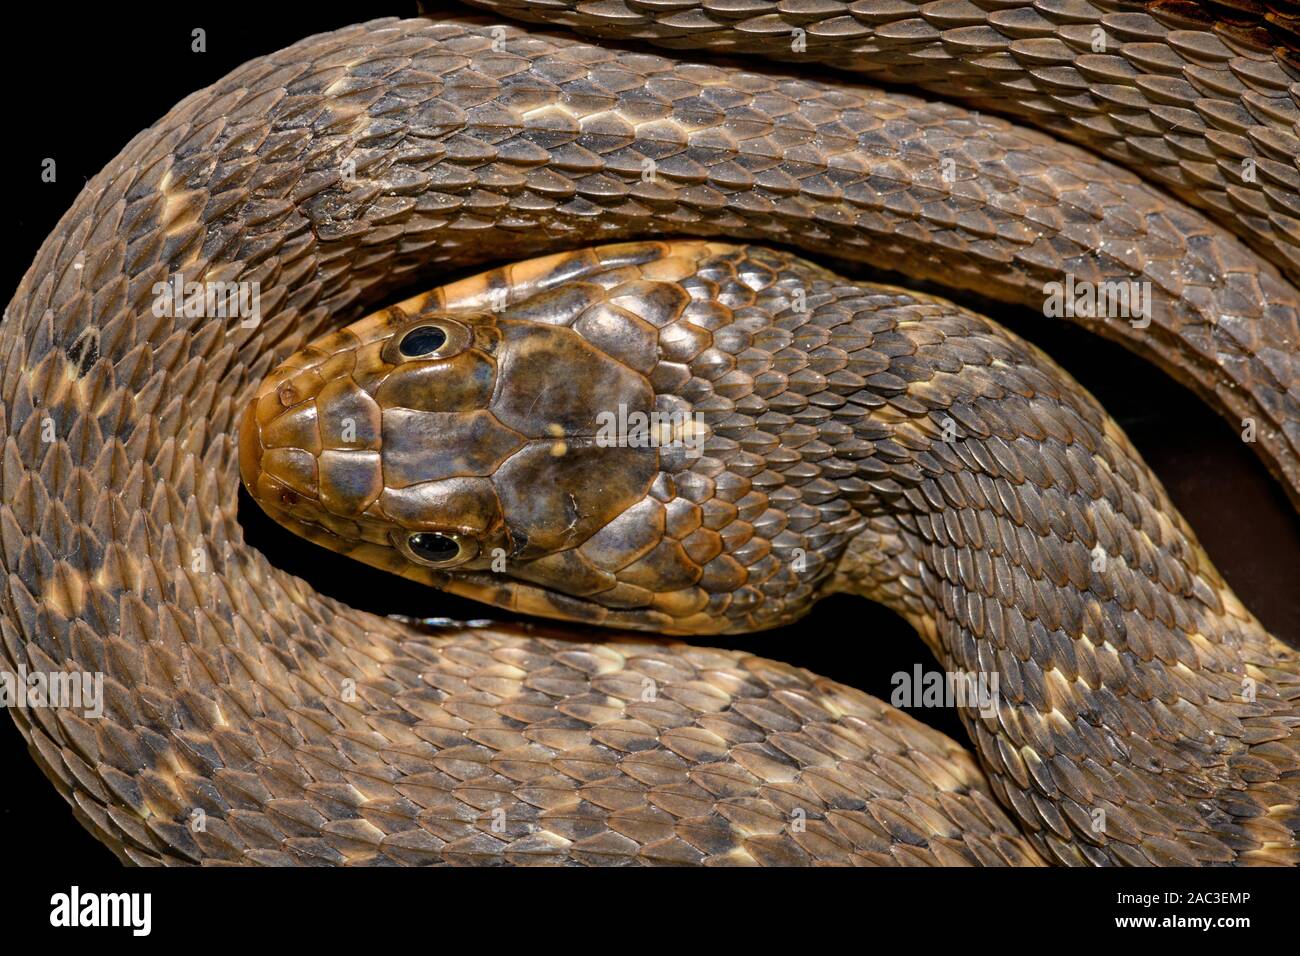 Plain-bellied water snake (Nerodia erythrogaster flavigaster) Coiled close-up of head Stock Photo